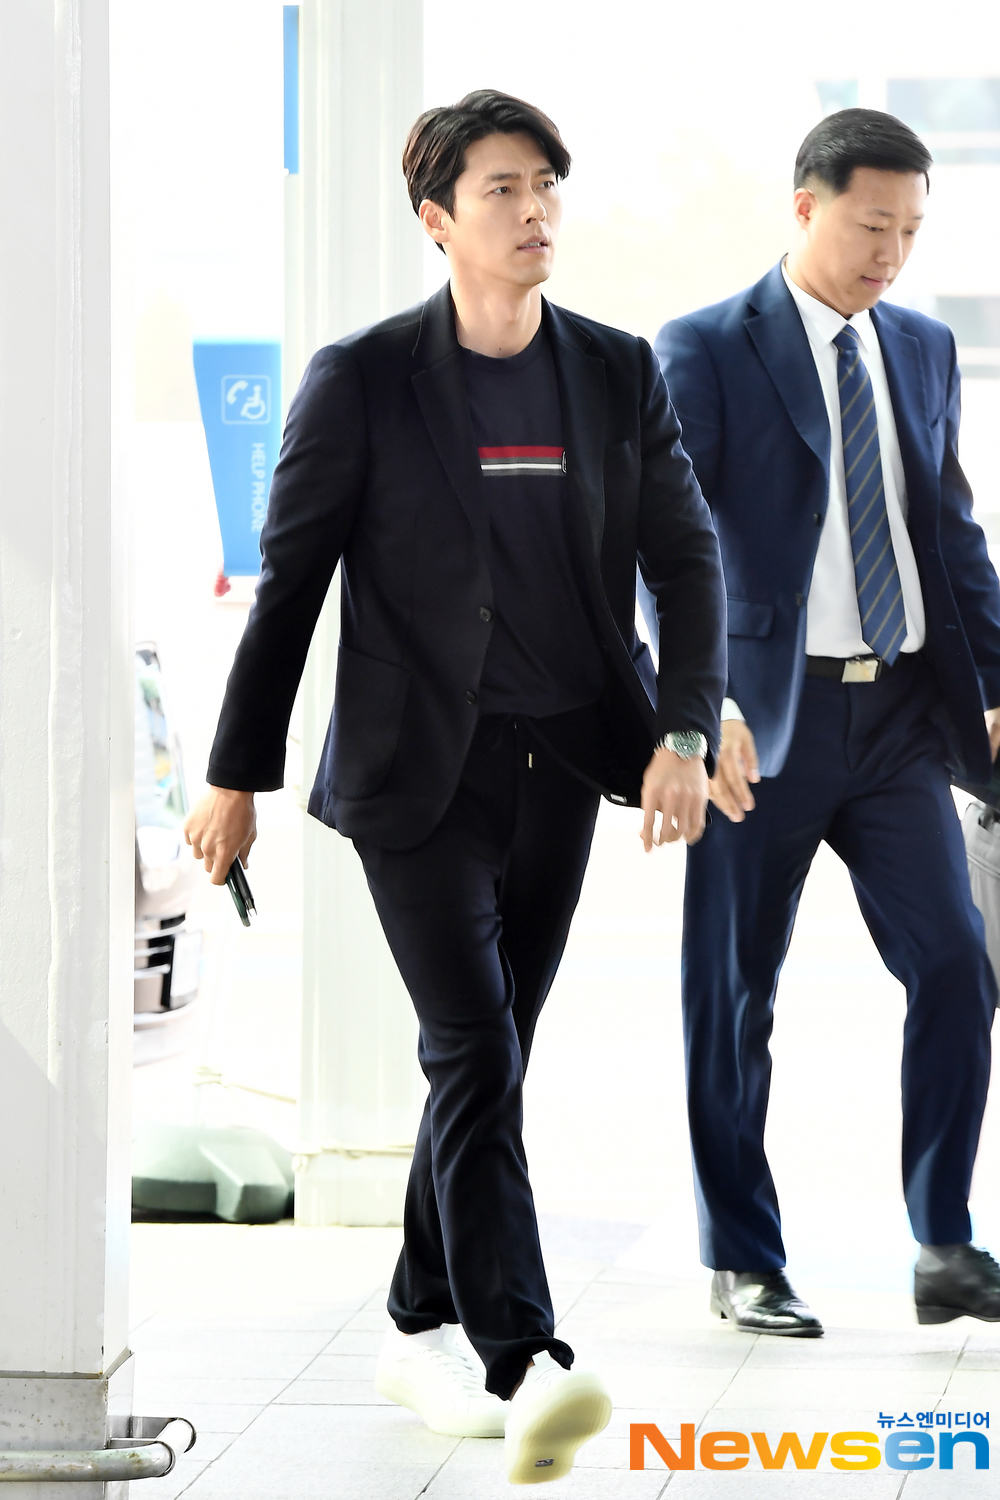 Actor Hyun Bin left for Taiwan on April 19 afternoon to attend the LOG INTO THE SPACE - 2019 Hyun Bin Fan Meeting Tour - in Taipei schedule through Incheon International Airport in Unseo-dong, Jung-gu, Incheon.Actor Hyun Bin is leaving for Taiwan with an airport fashion.exponential earthquake